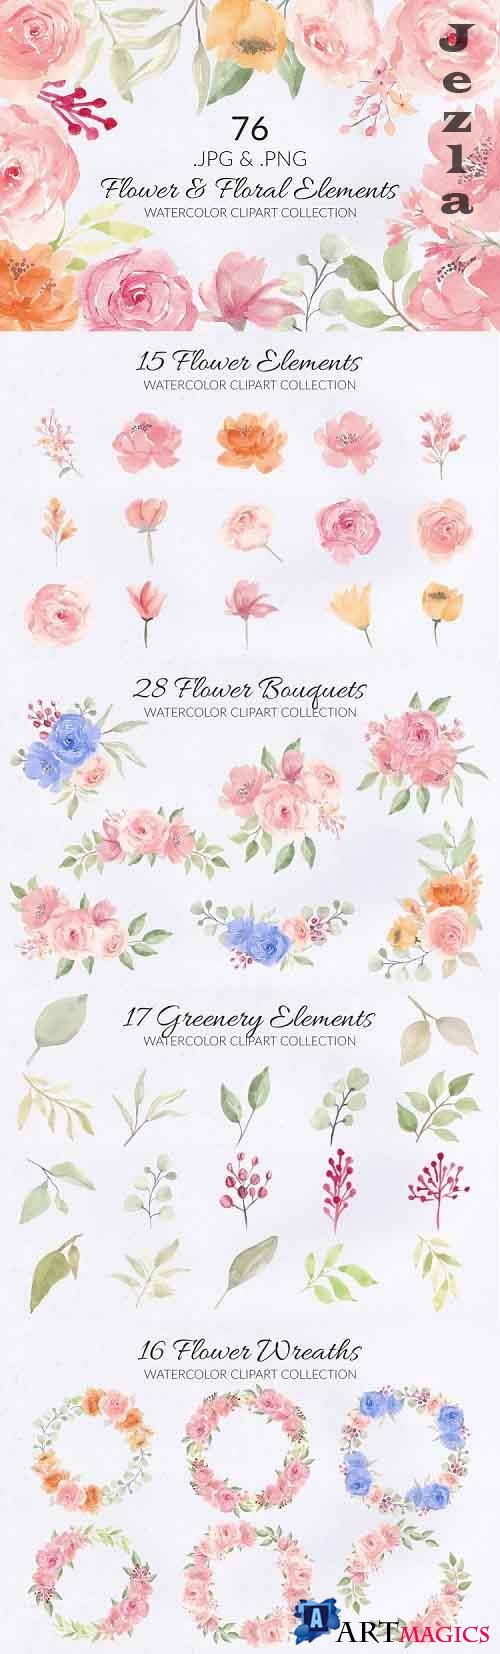 76 Flower and Floral Watercolor Illustration Clip Art - 561675